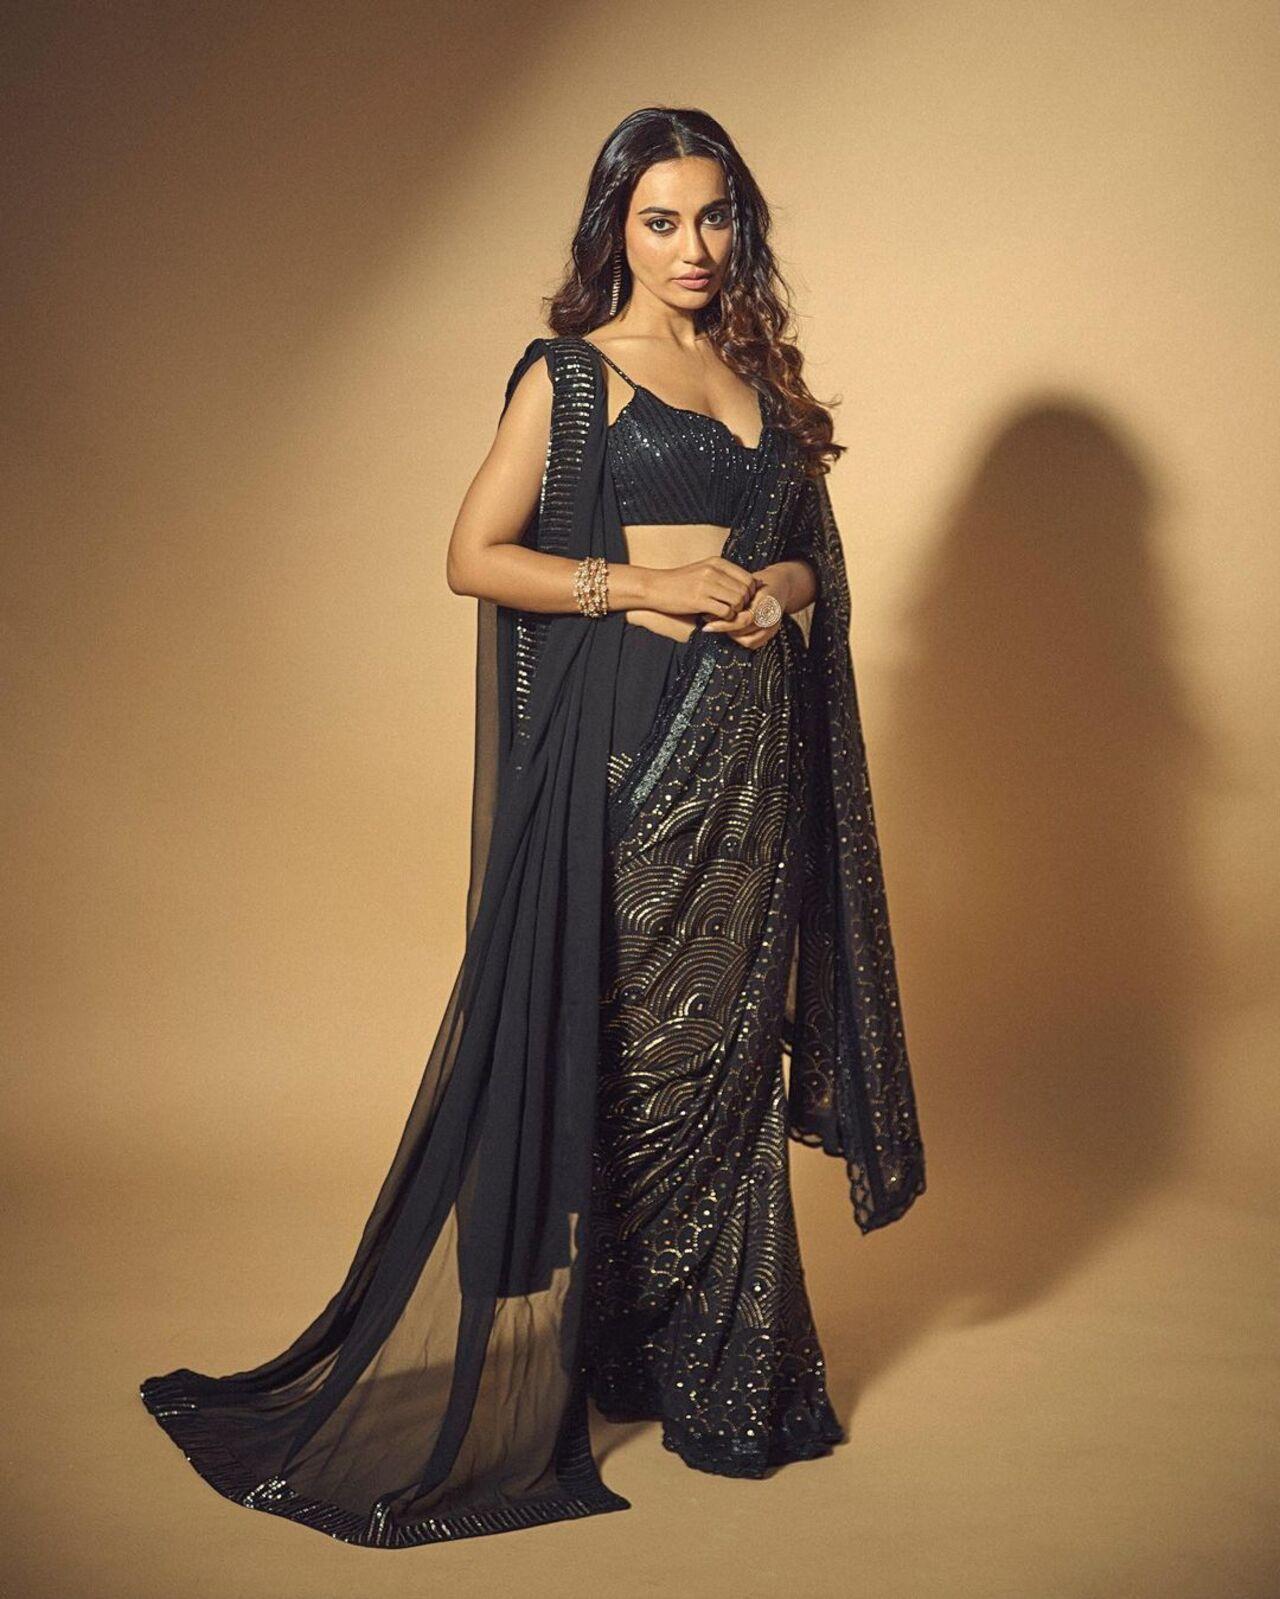 Surbhi Jyoti looked stunning in a black sequin saree complemented by a deep-neck matching blouse